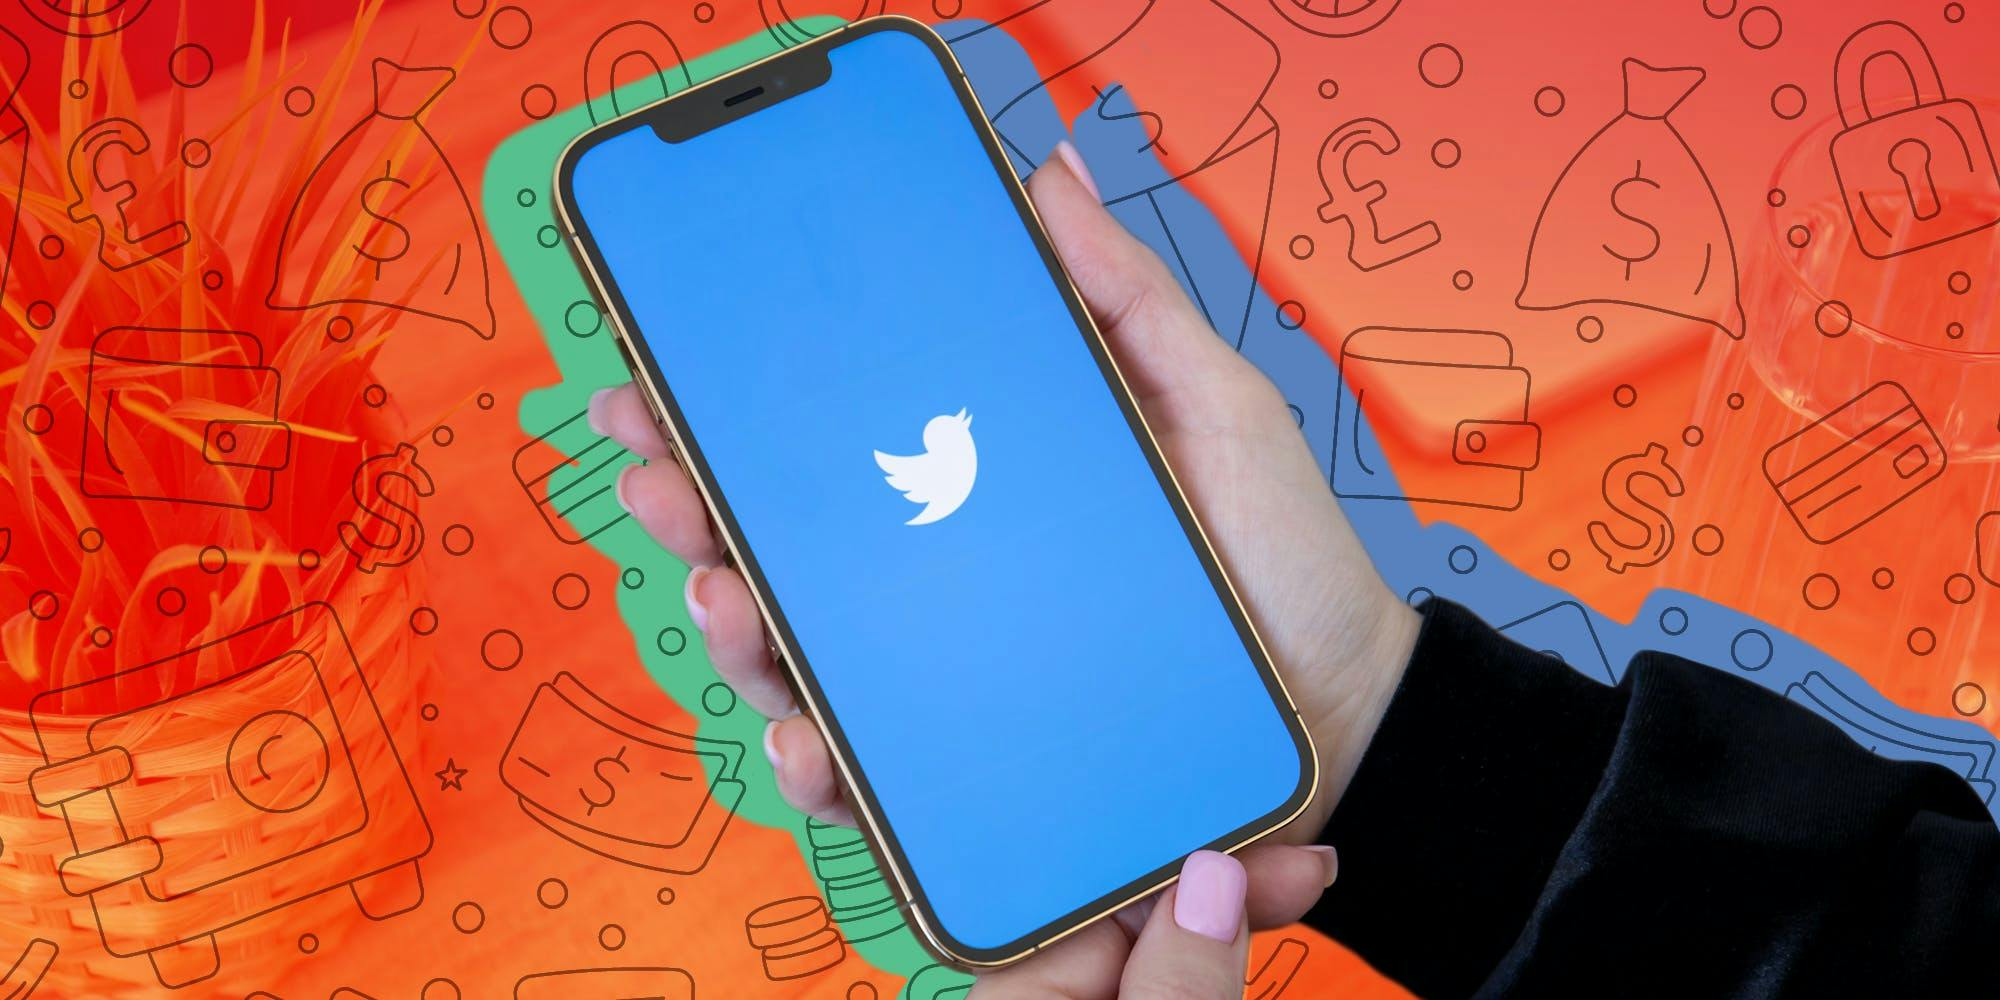 hand holding phone with Twitter on screen in front of desk background with money icons background and red to orange vertical gradient overlay Passionfruit Remix